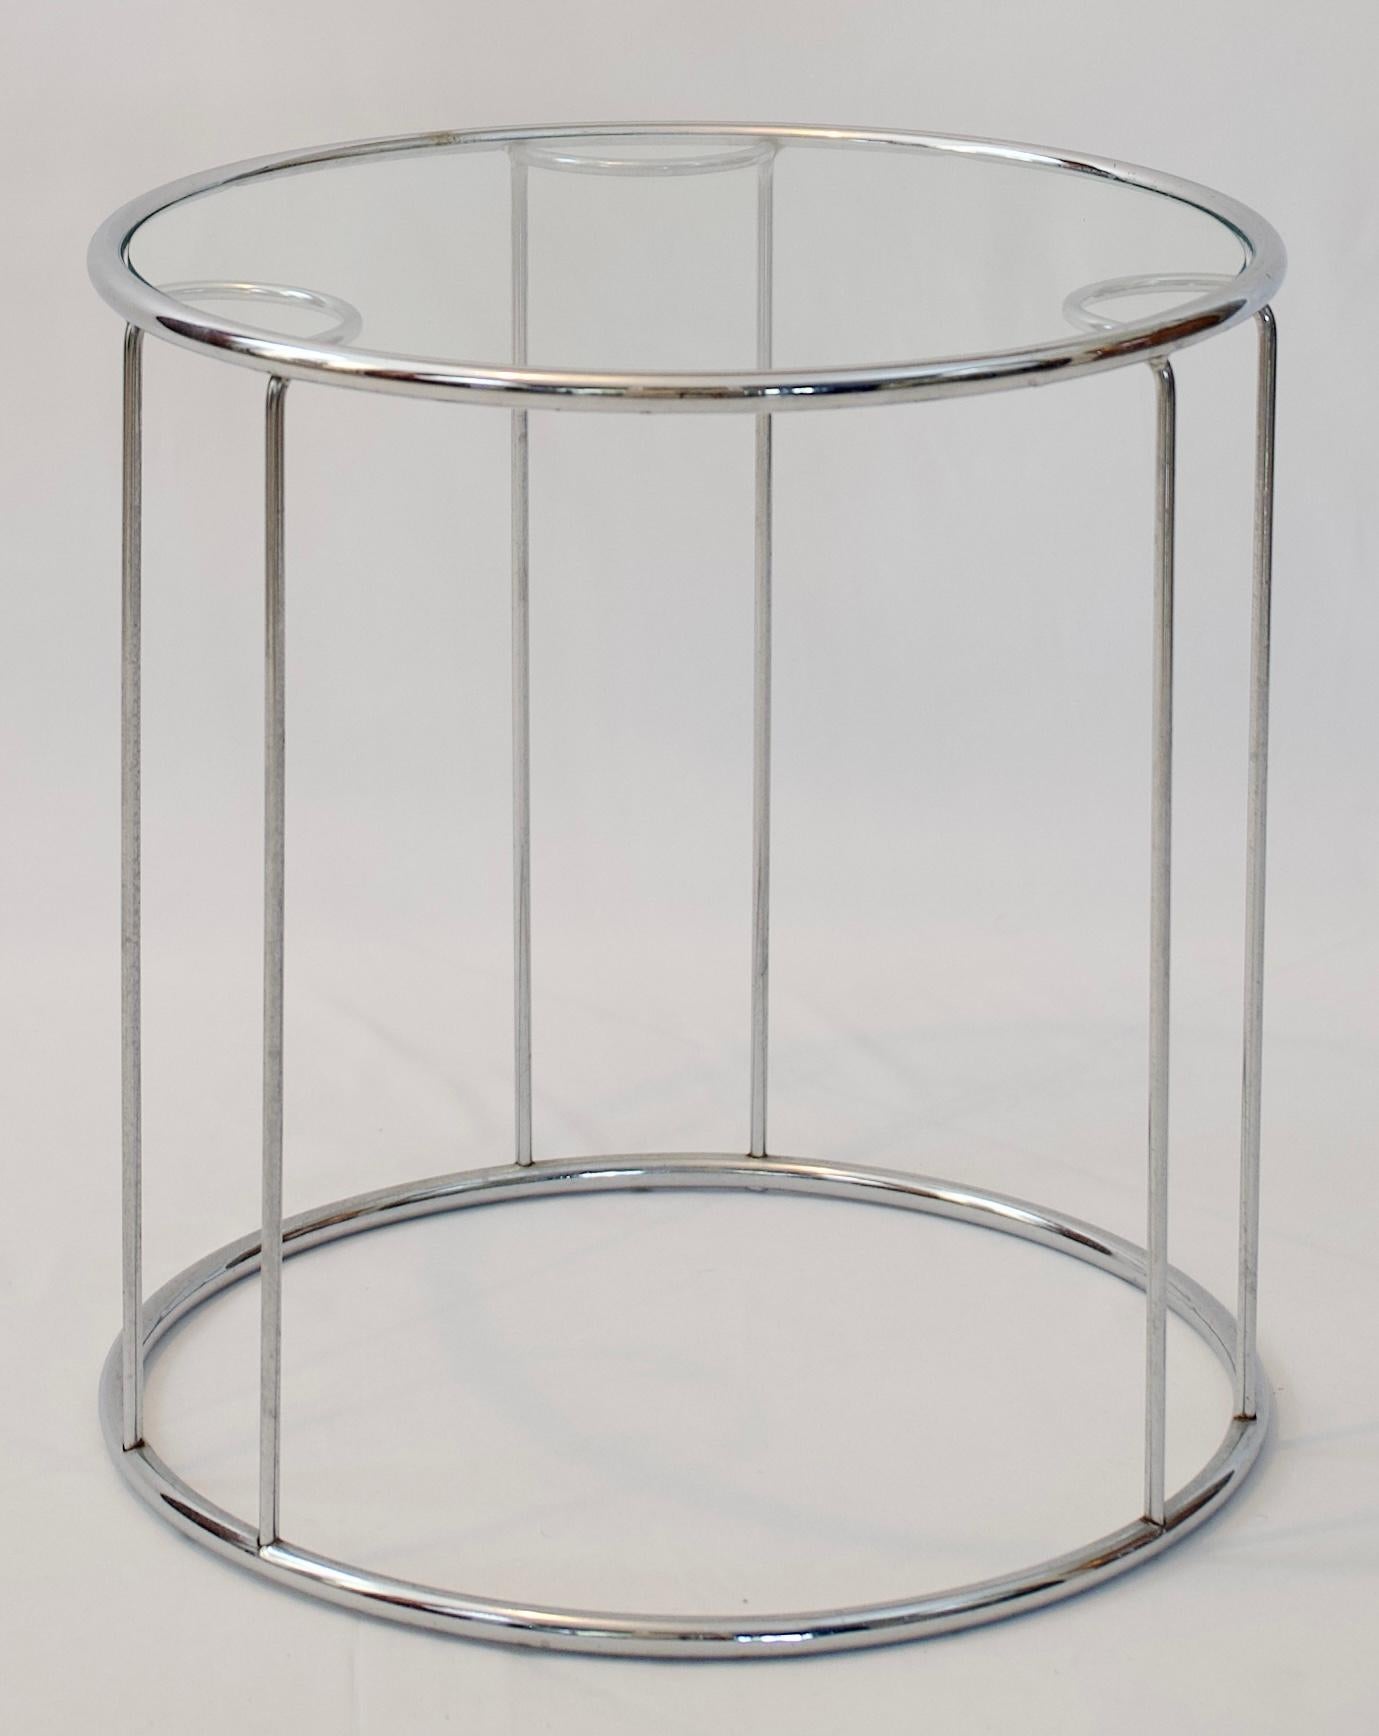 Set of Three Round Chrome and Glass Nesting End Tables Milo Baughman Style For Sale 2